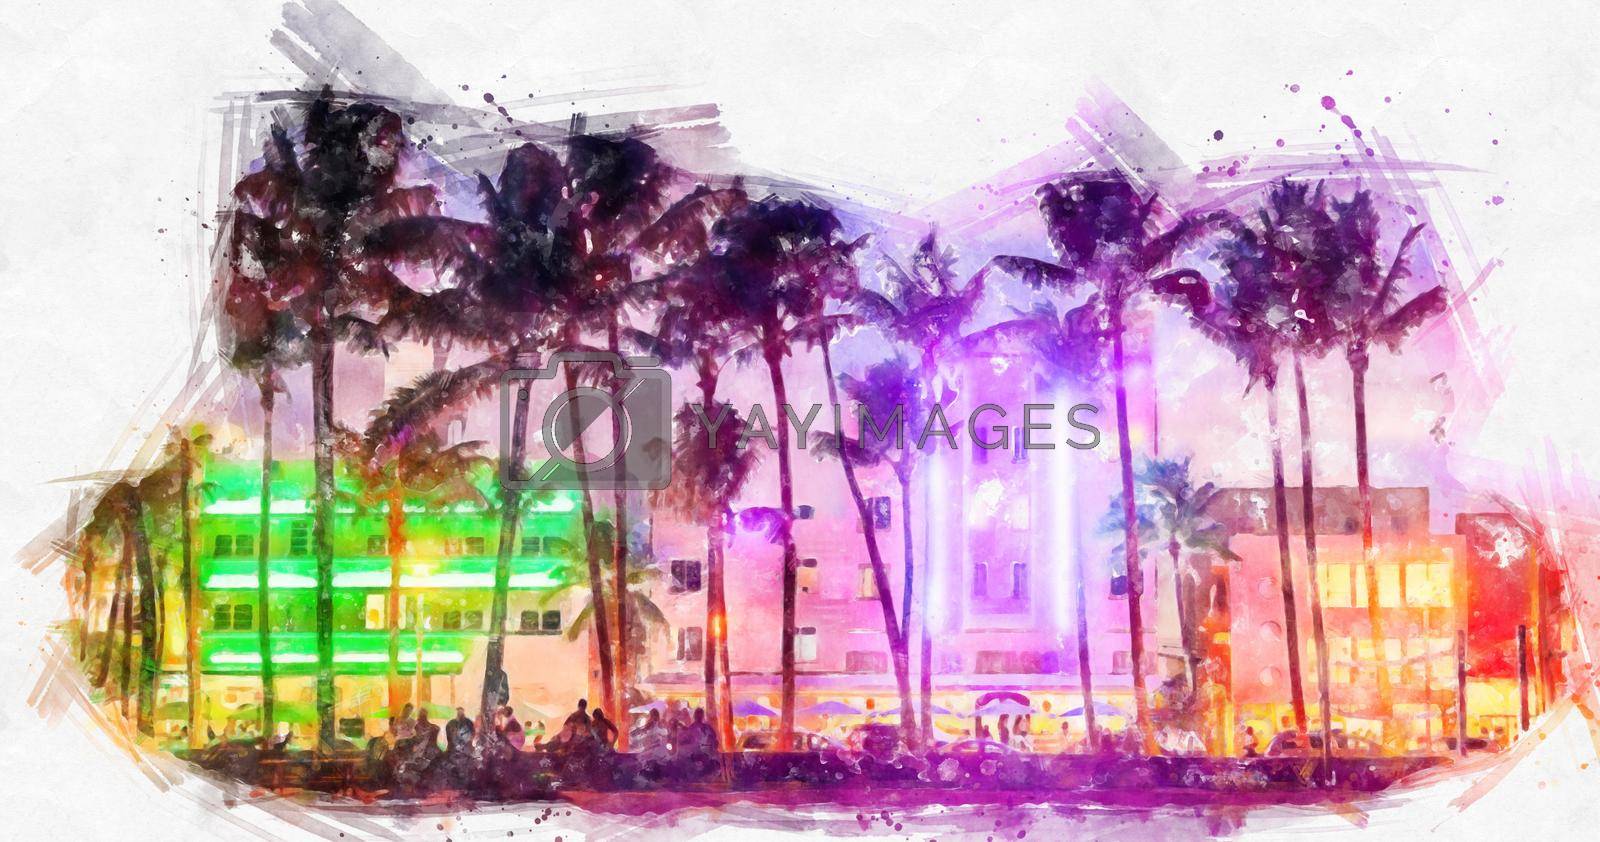 Watercolor painting illustration of Ocean Drive hotels and restaurants at sunset. City skyline with palm trees at night. Art deco nightlife on the South beach